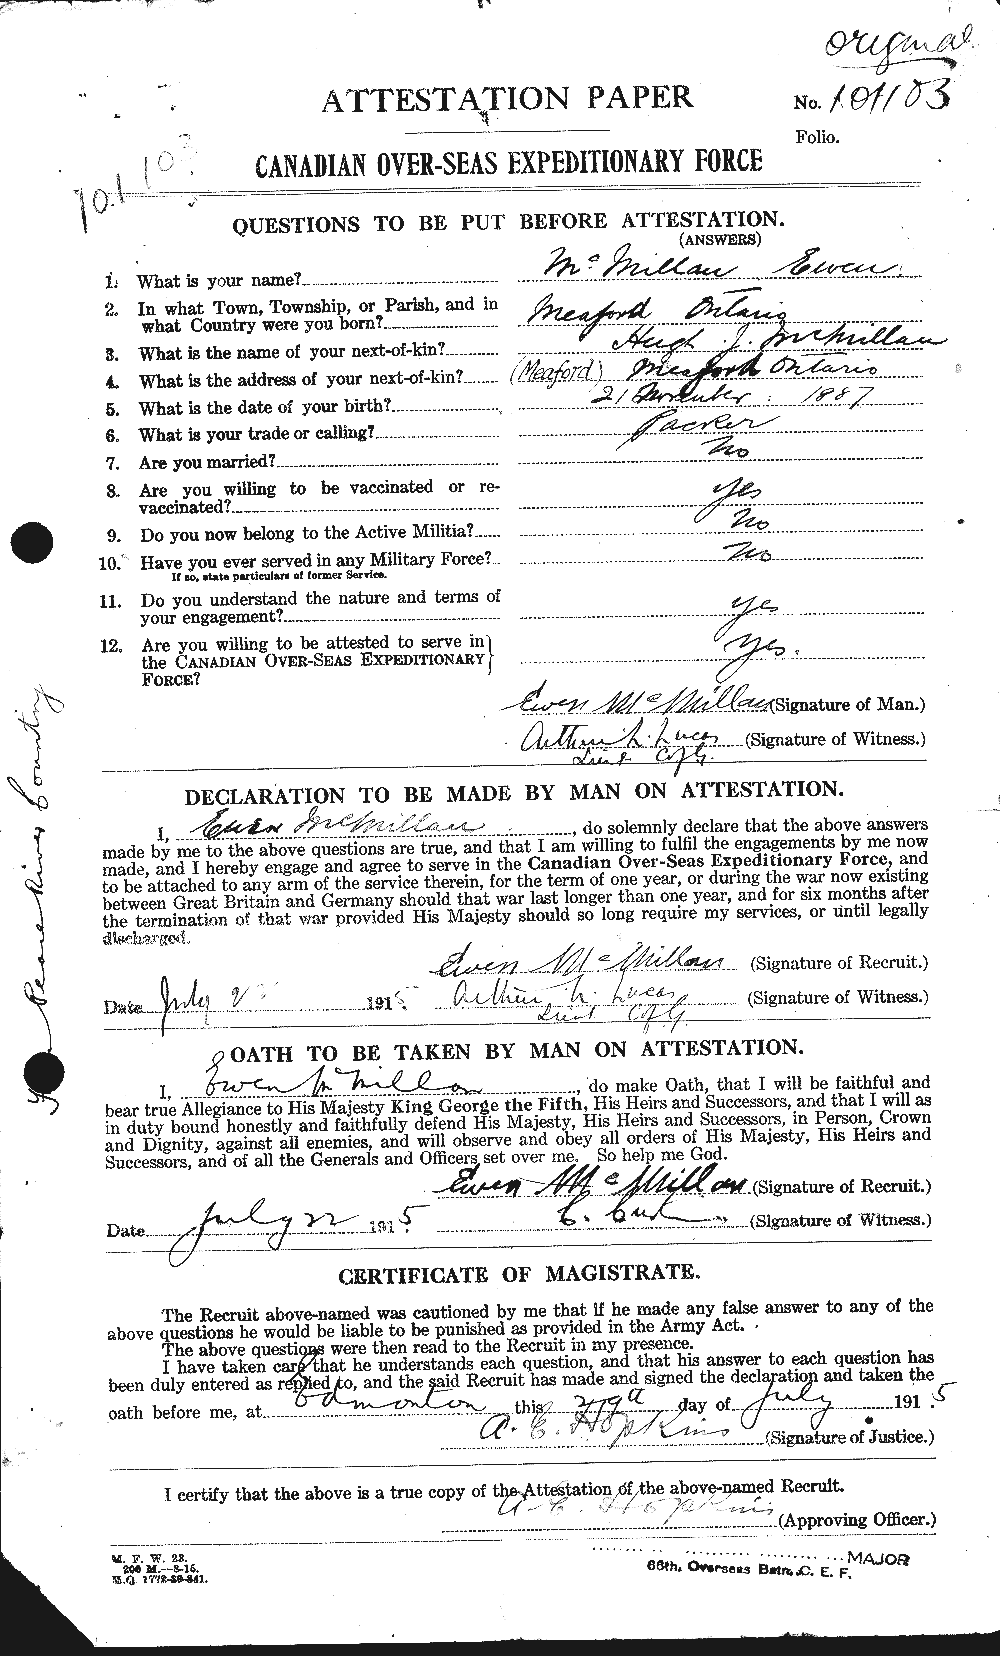 Personnel Records of the First World War - CEF 537687a